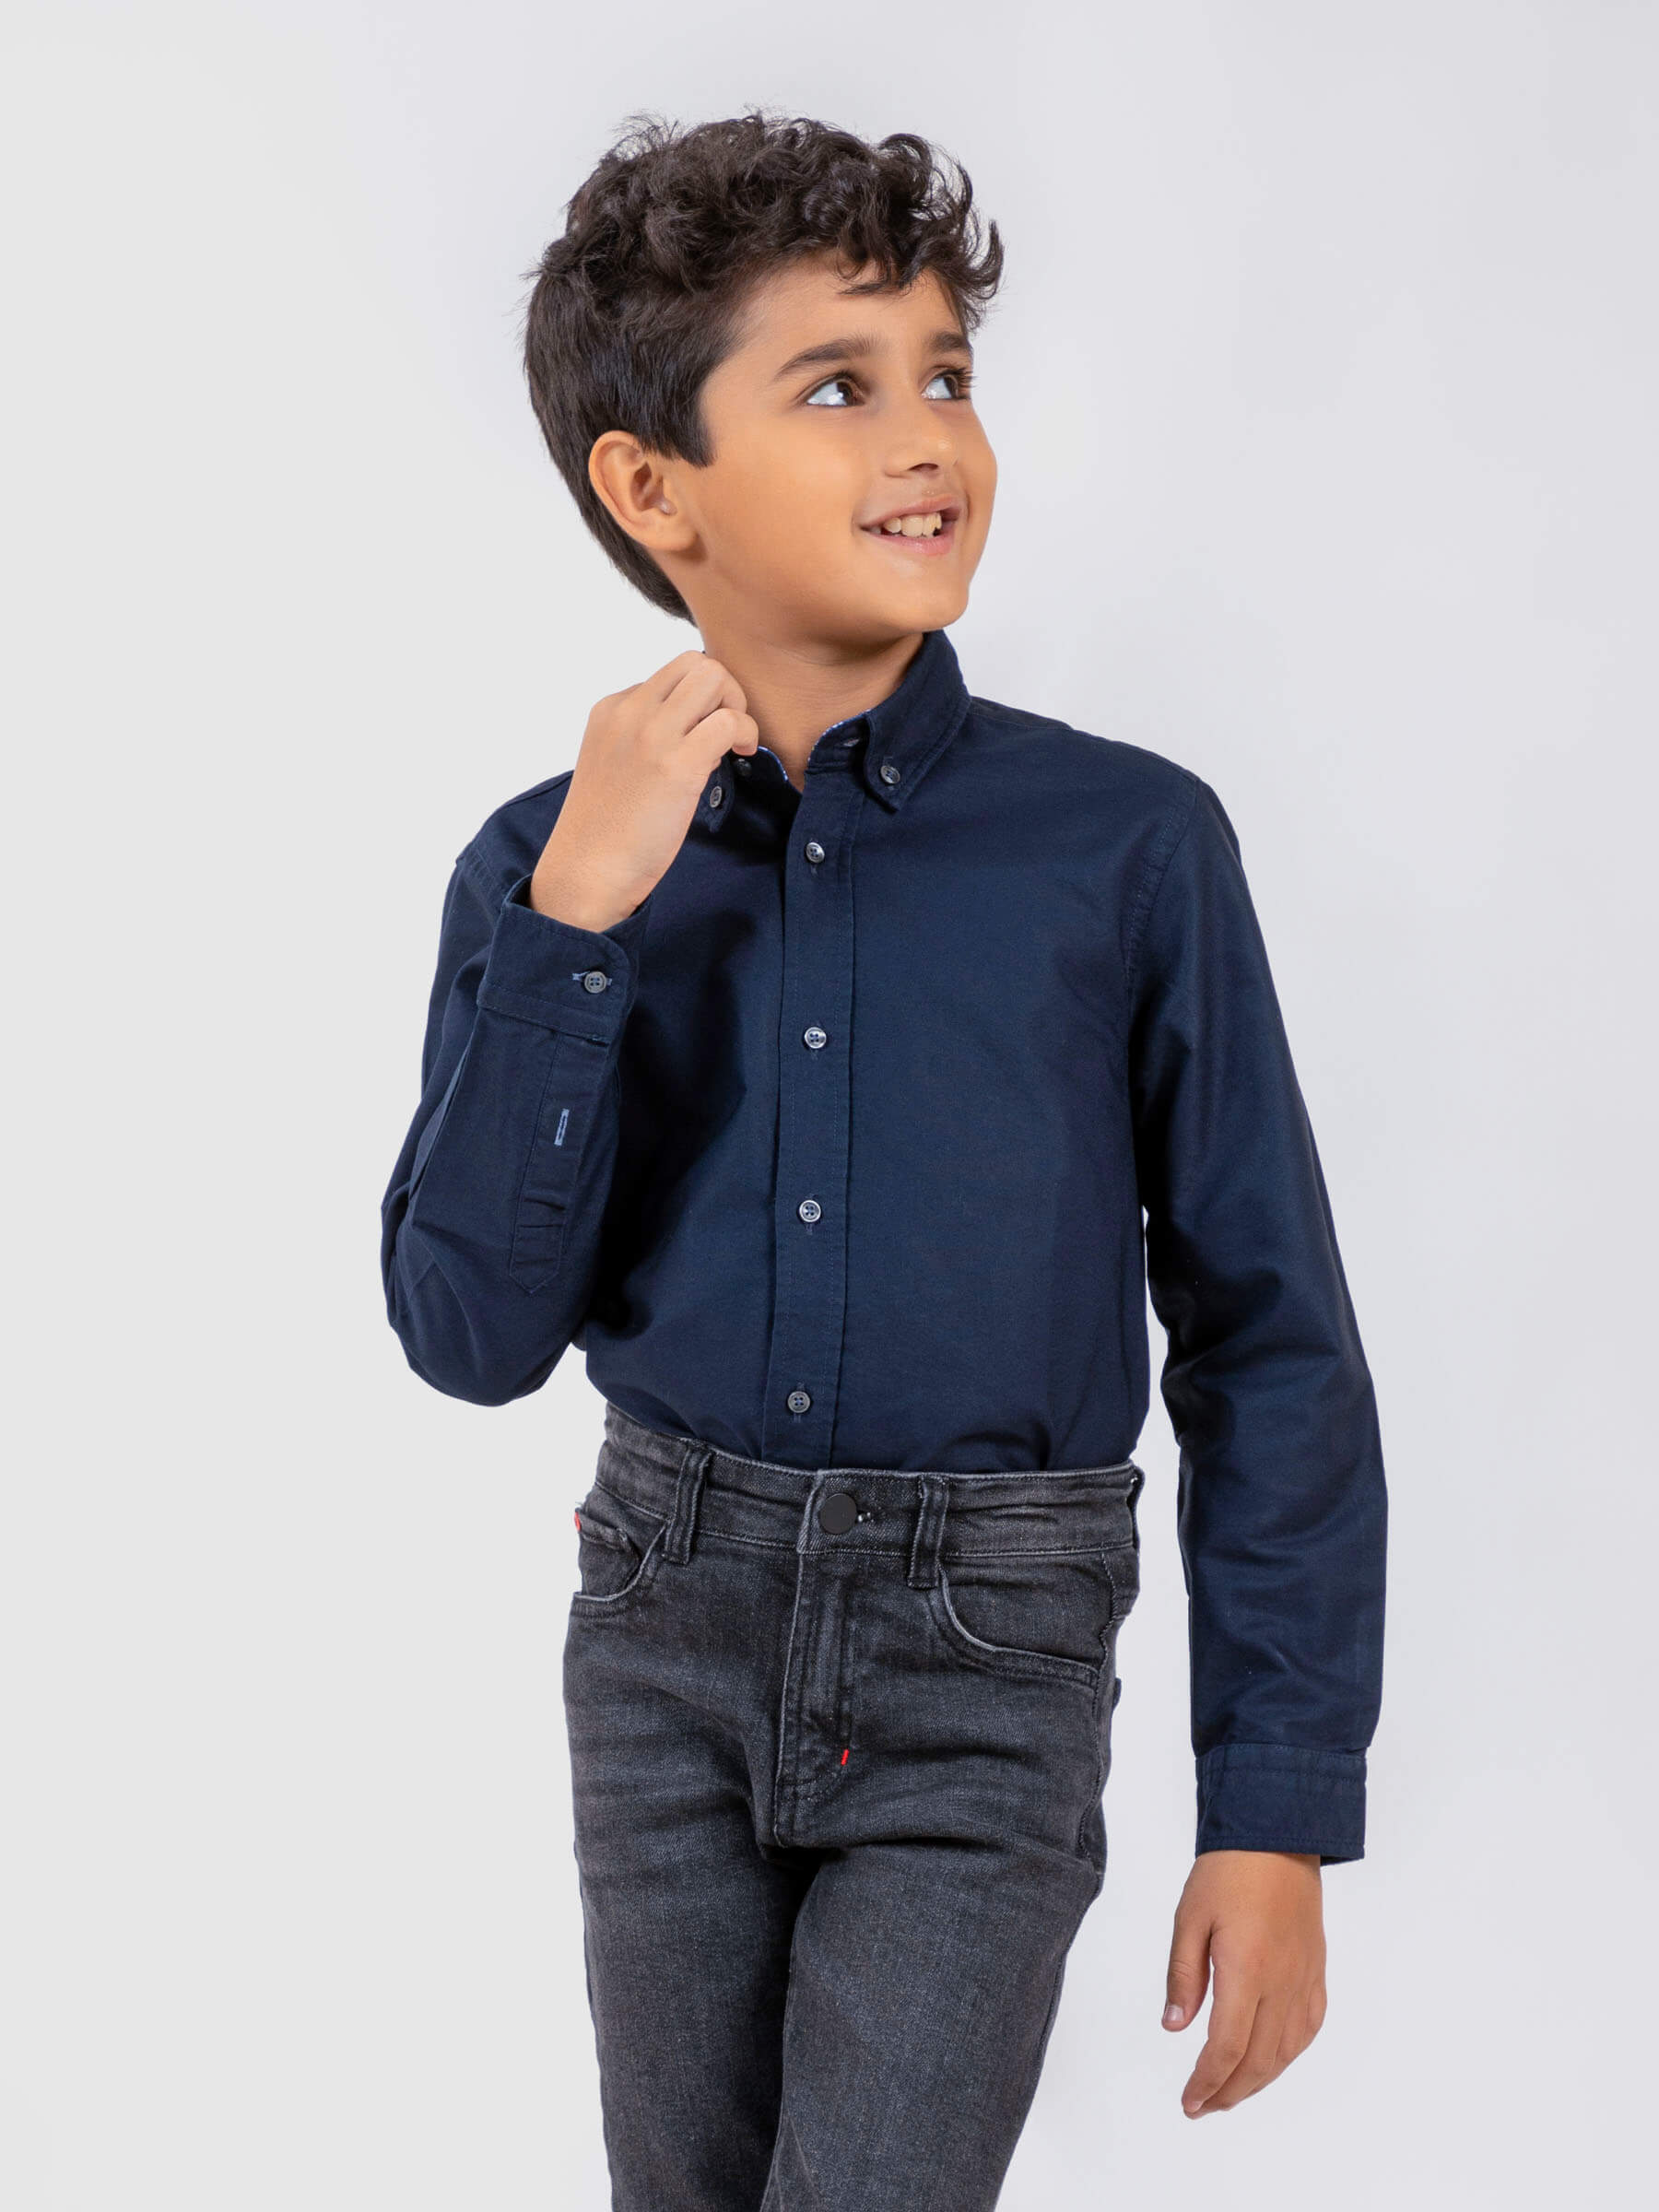 Navy Oxford Long Sleeve Casual Shirt With Detailing Brumano Pakistan